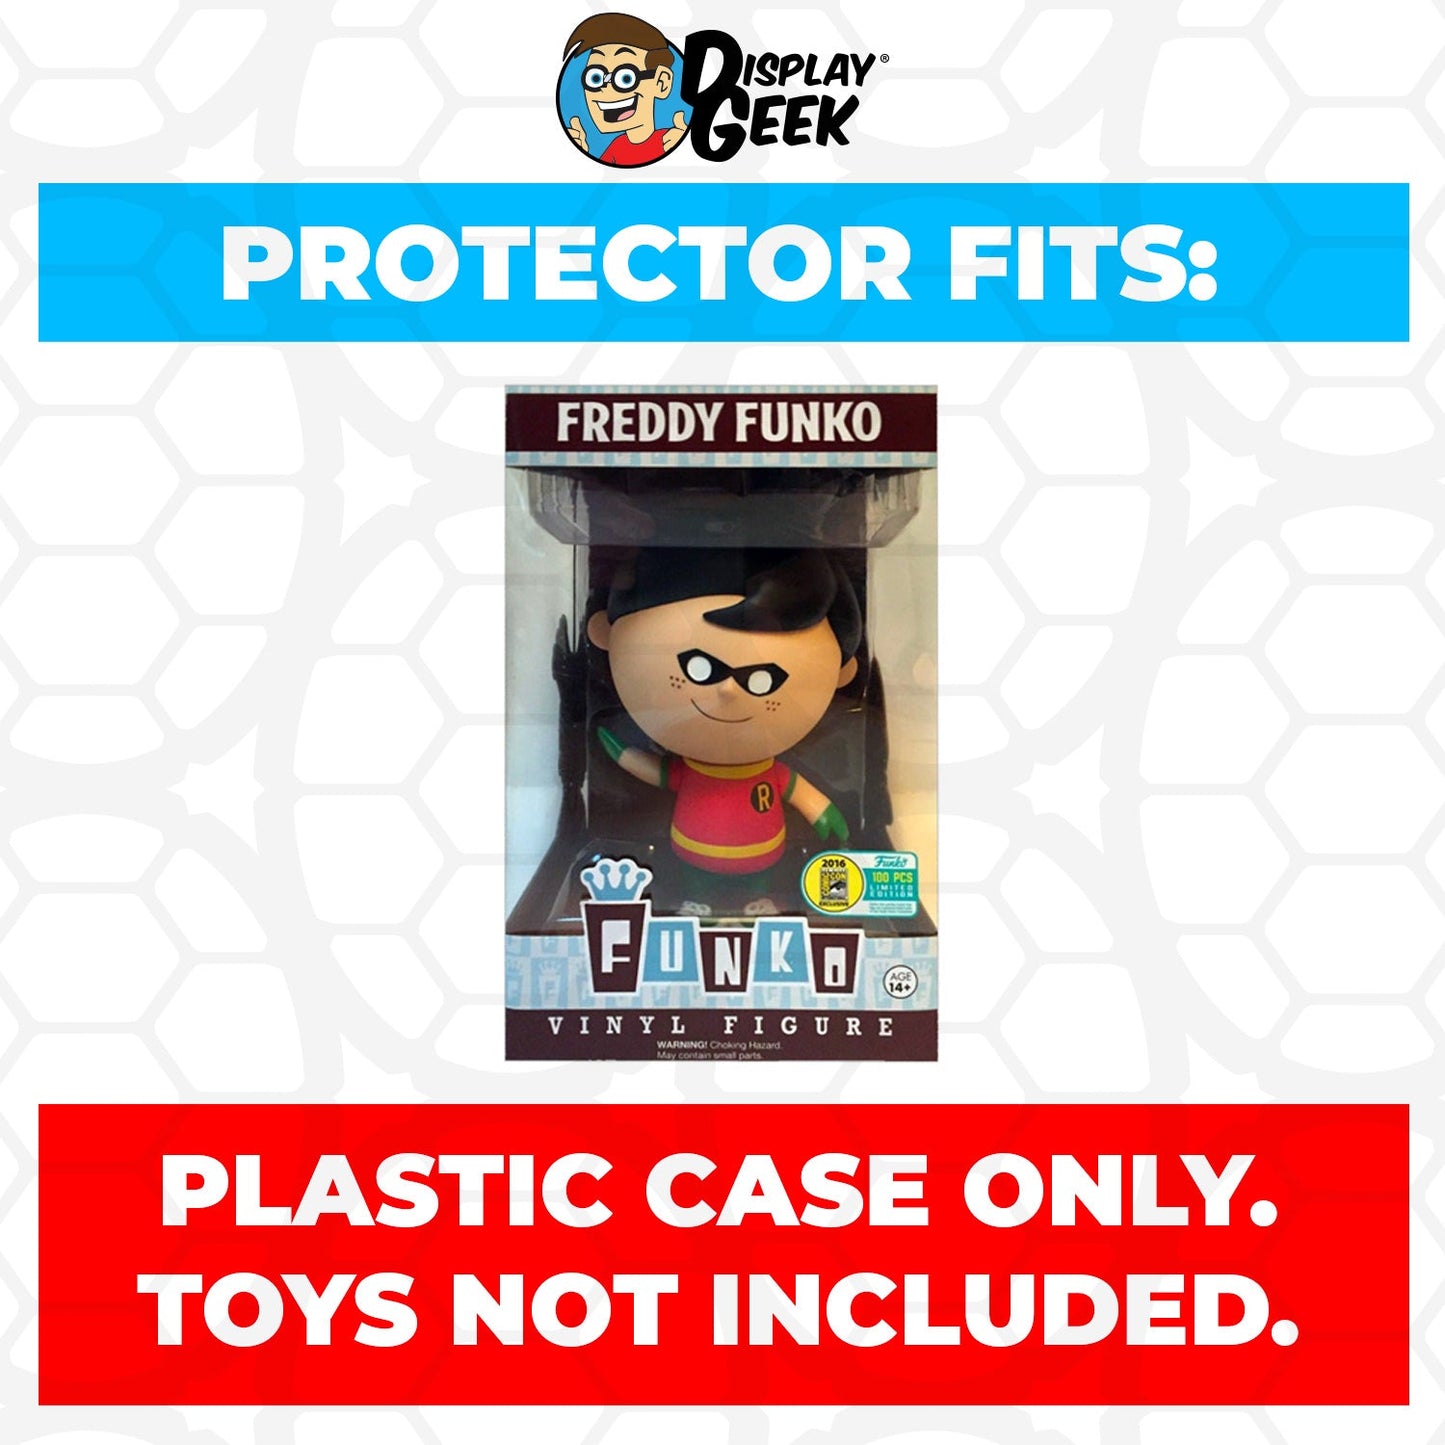 Pop Protector for Freddy Funko as Robin SDCC LE 100 - PPG Pop Protector Guide Search Created by Display Geek